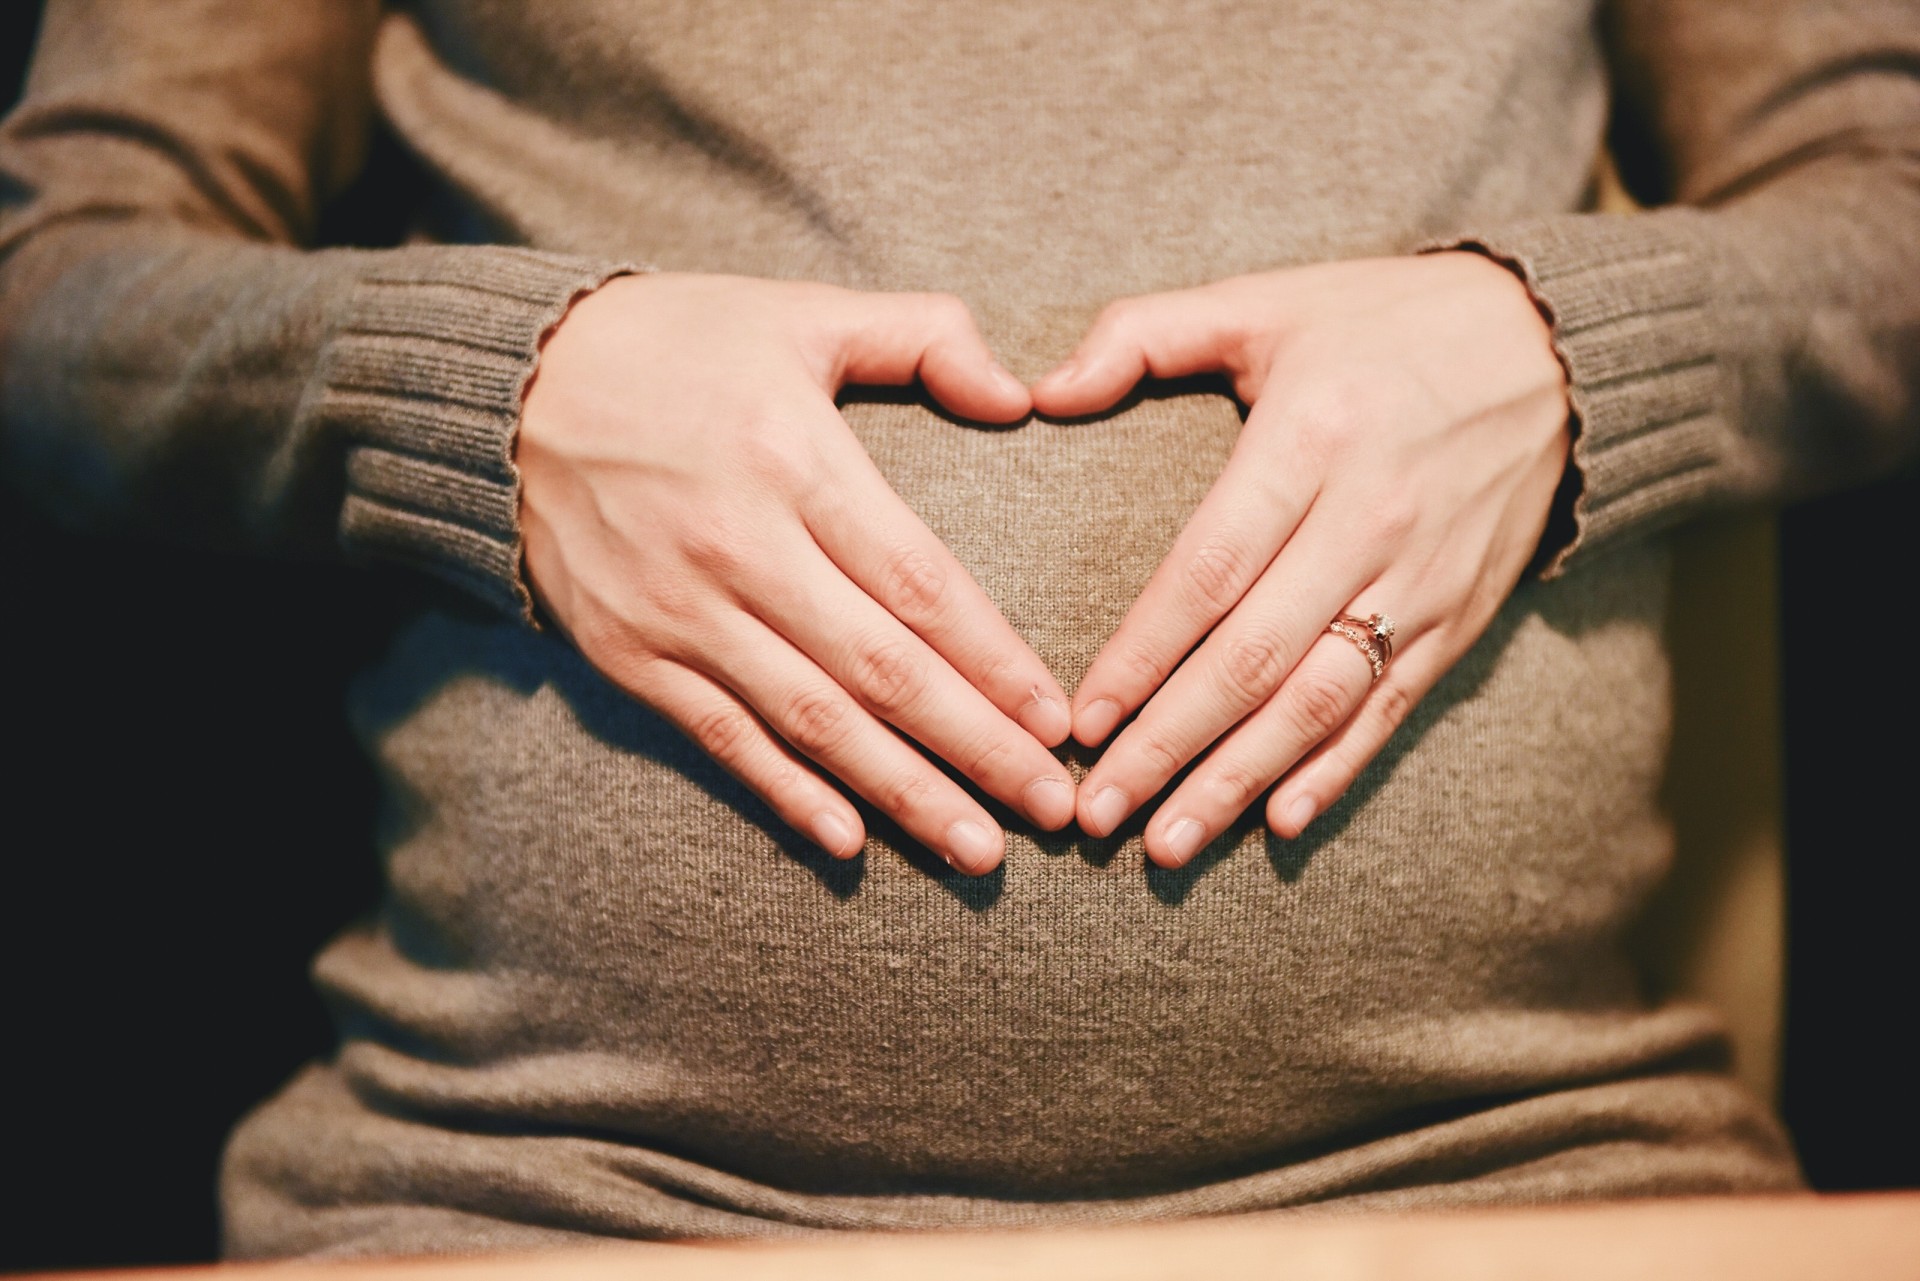 A hand forming a heart over a pregnant belly